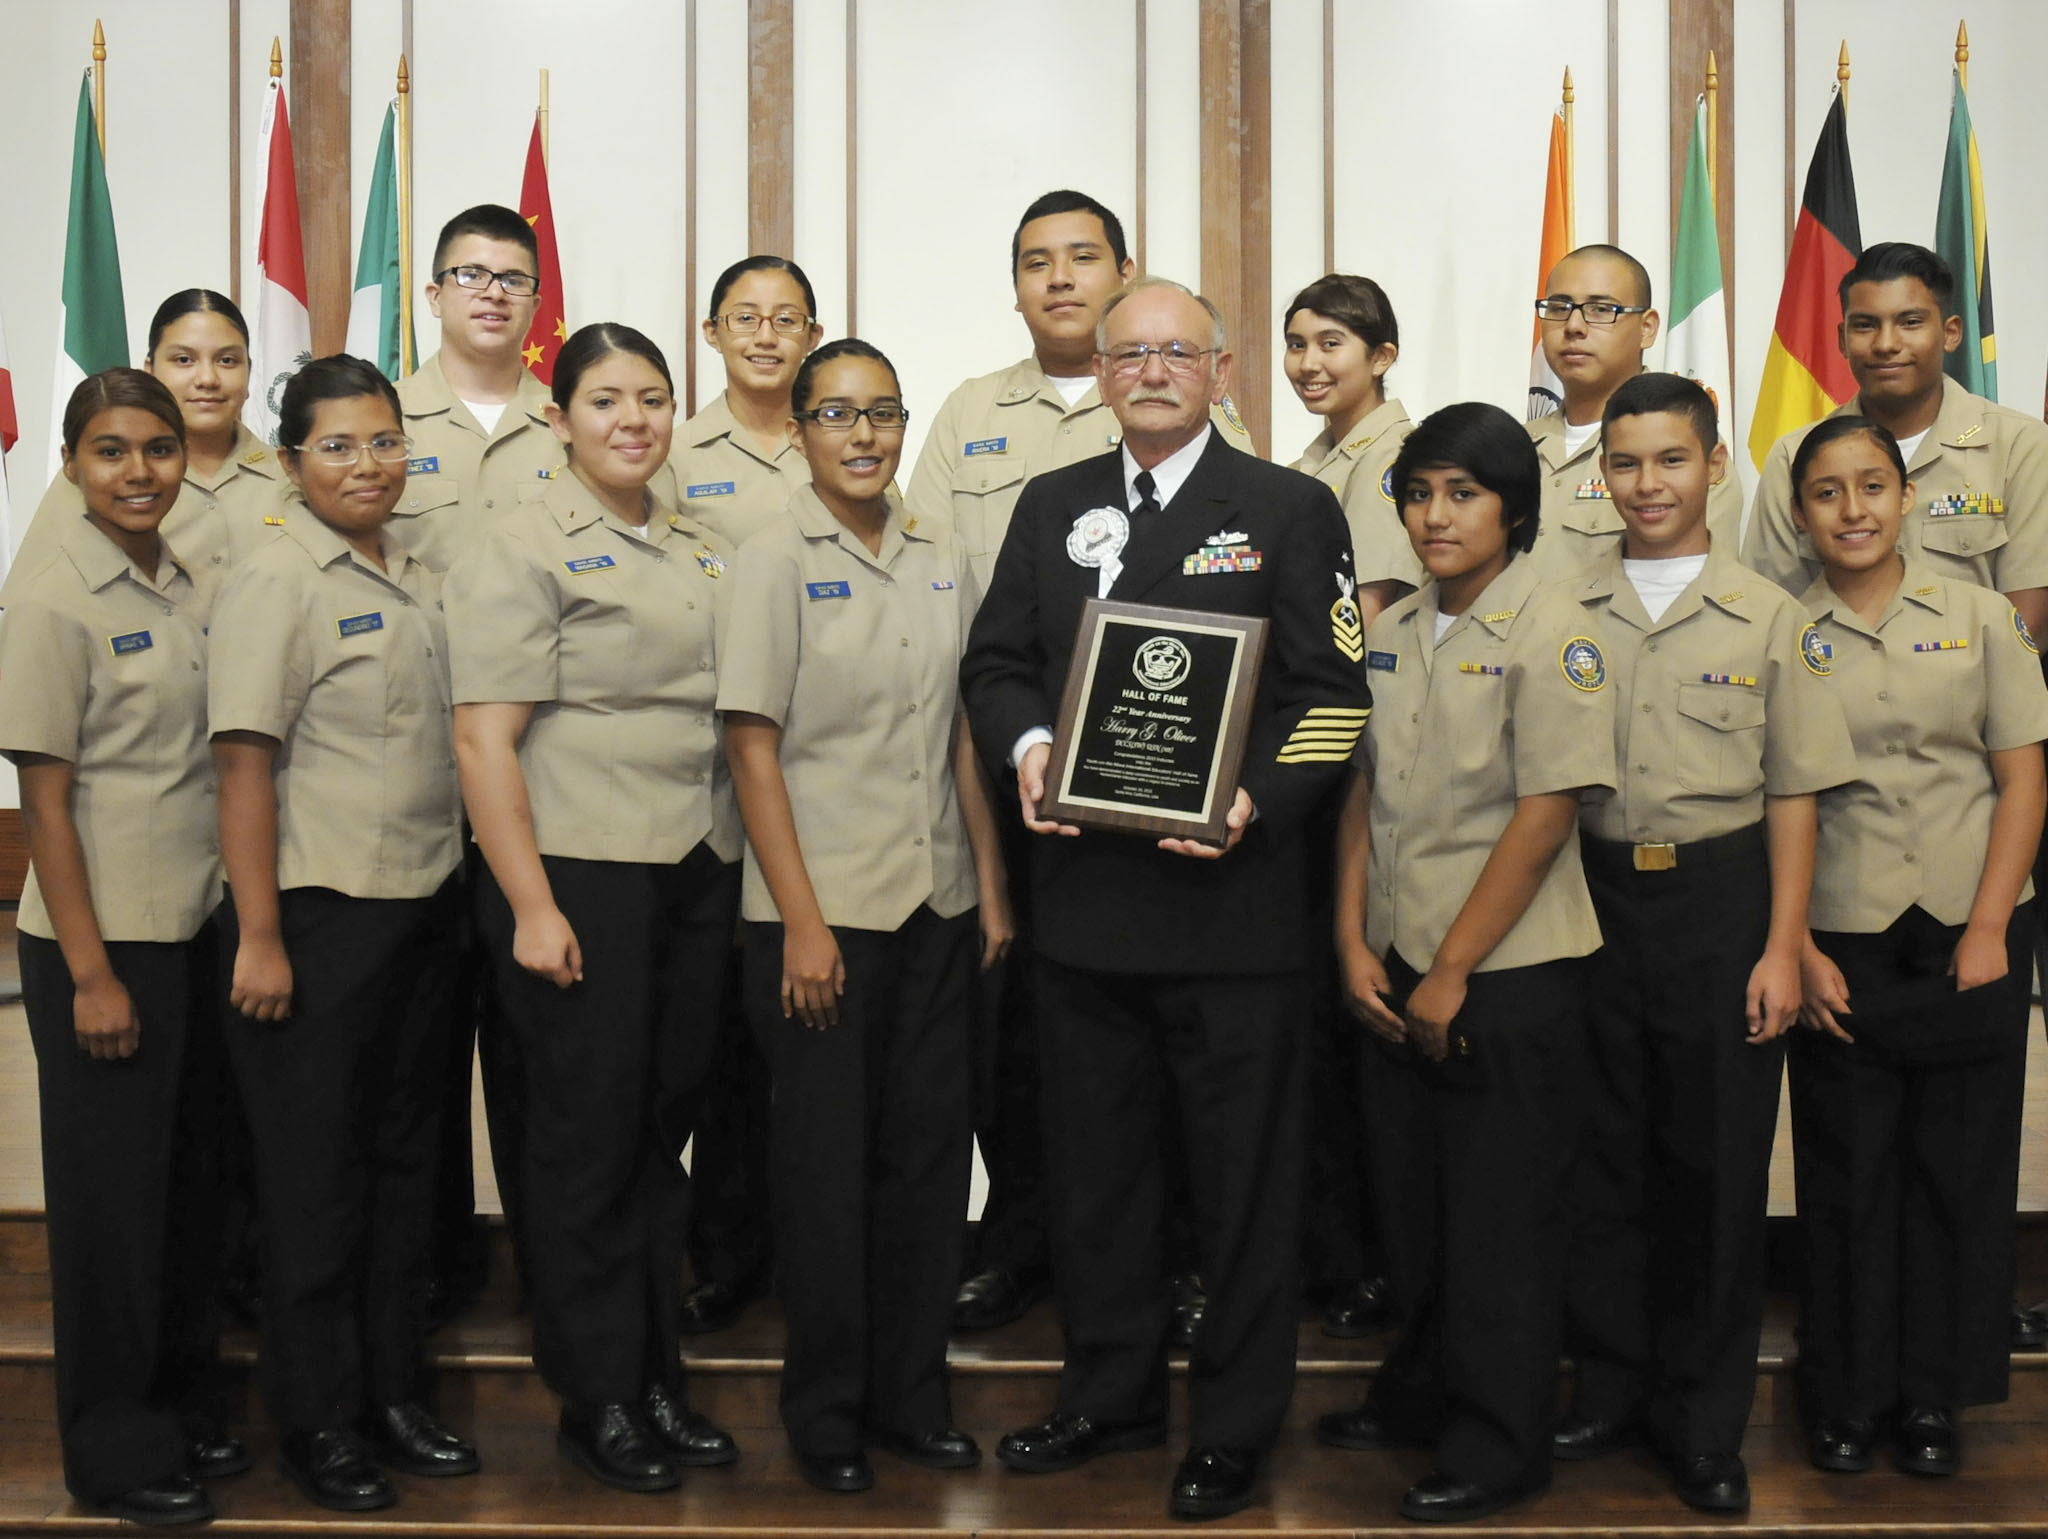 Inductee Harry G Oliver with the Santa Ana NJROTC which he has instructed for the past 19 years